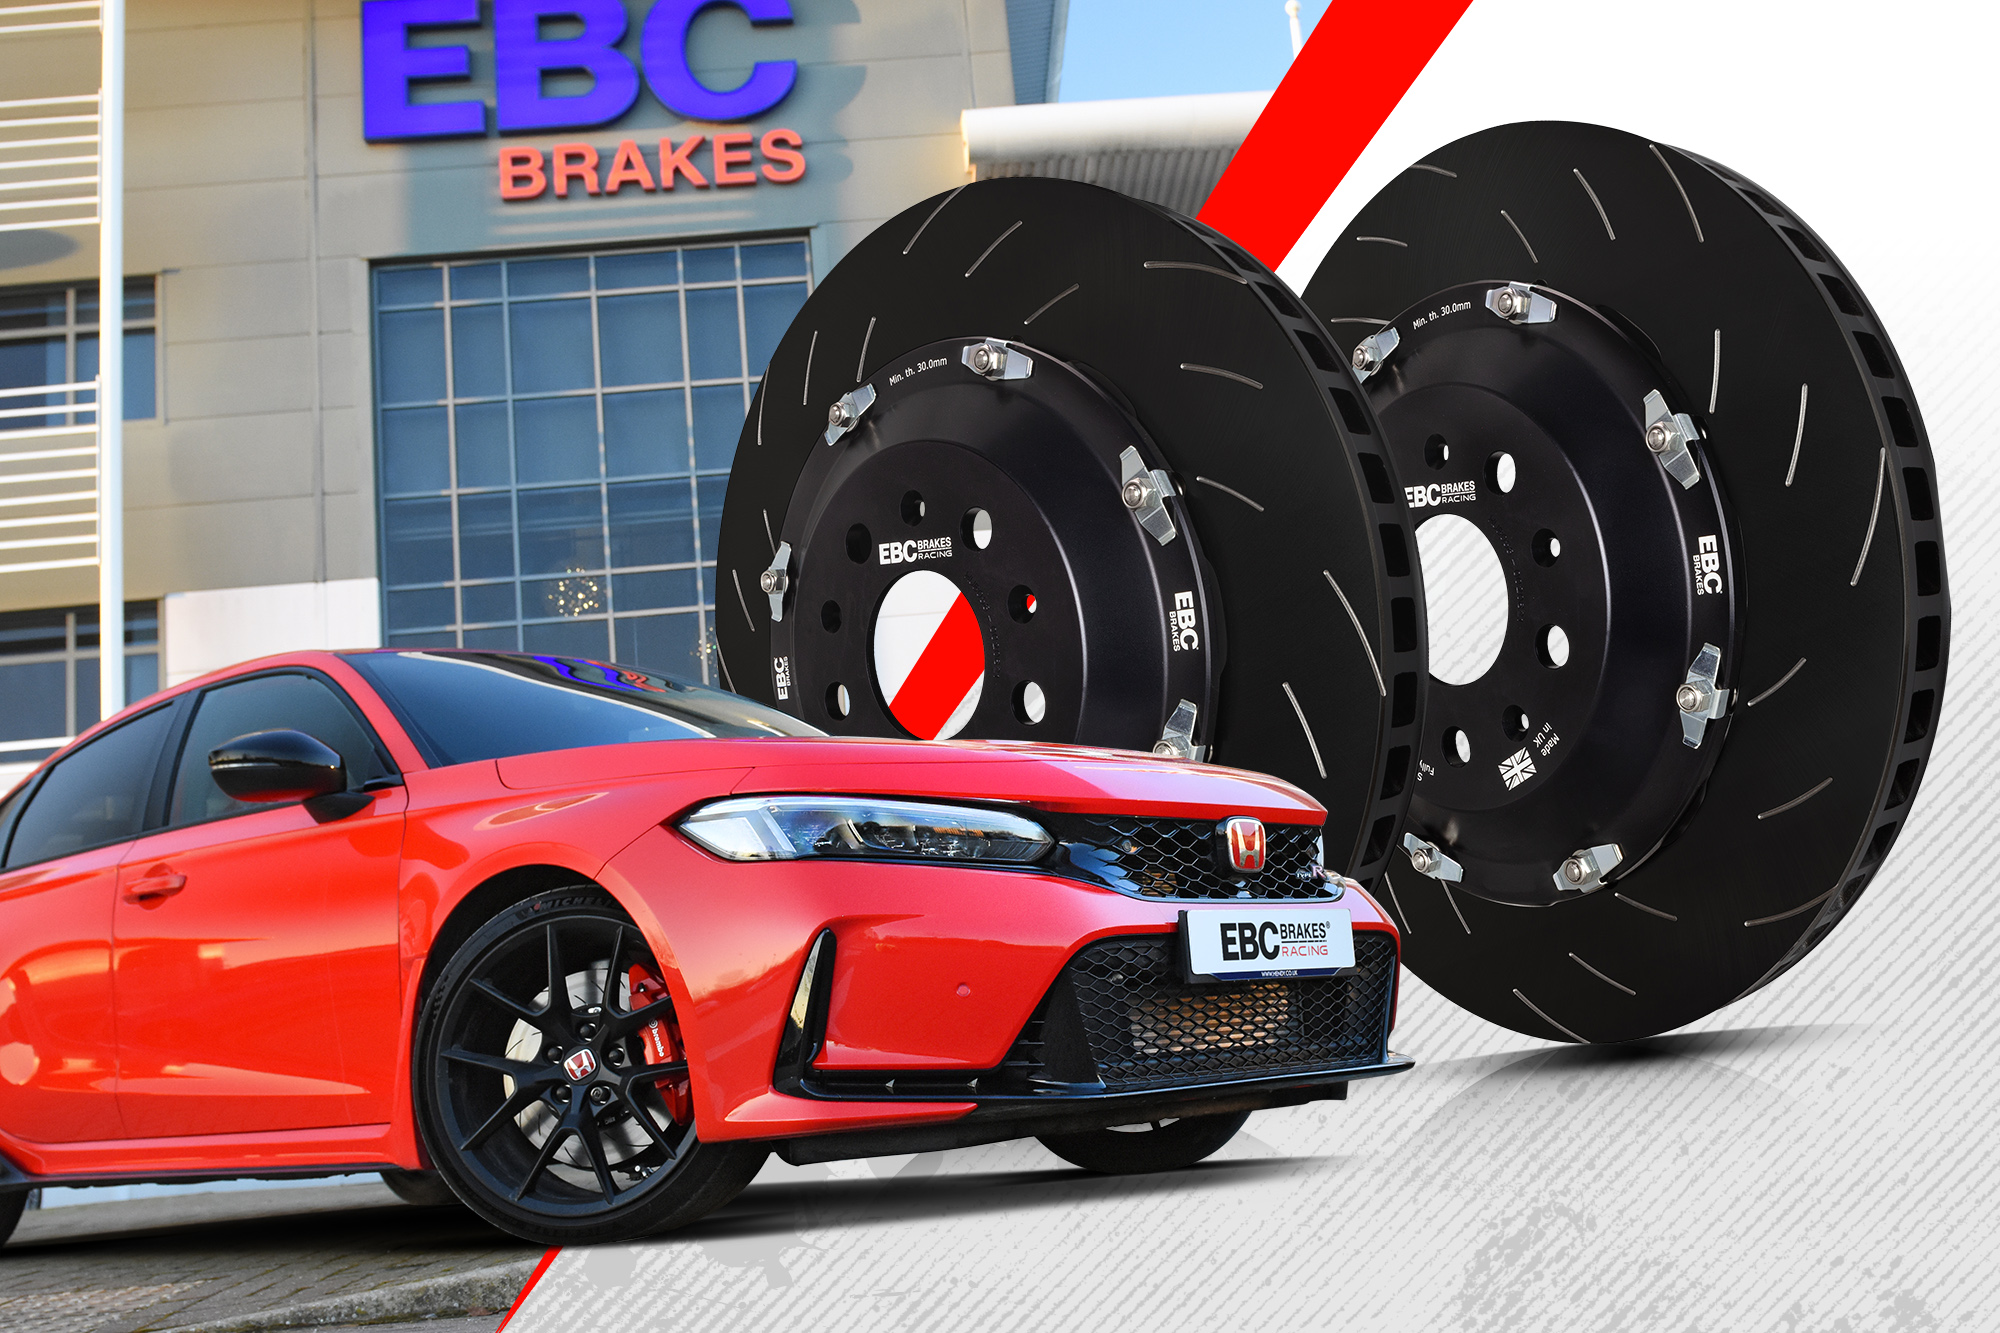 EBC Brakes Launches Range of High-Performance Braking Components for New Honda Civic Type R